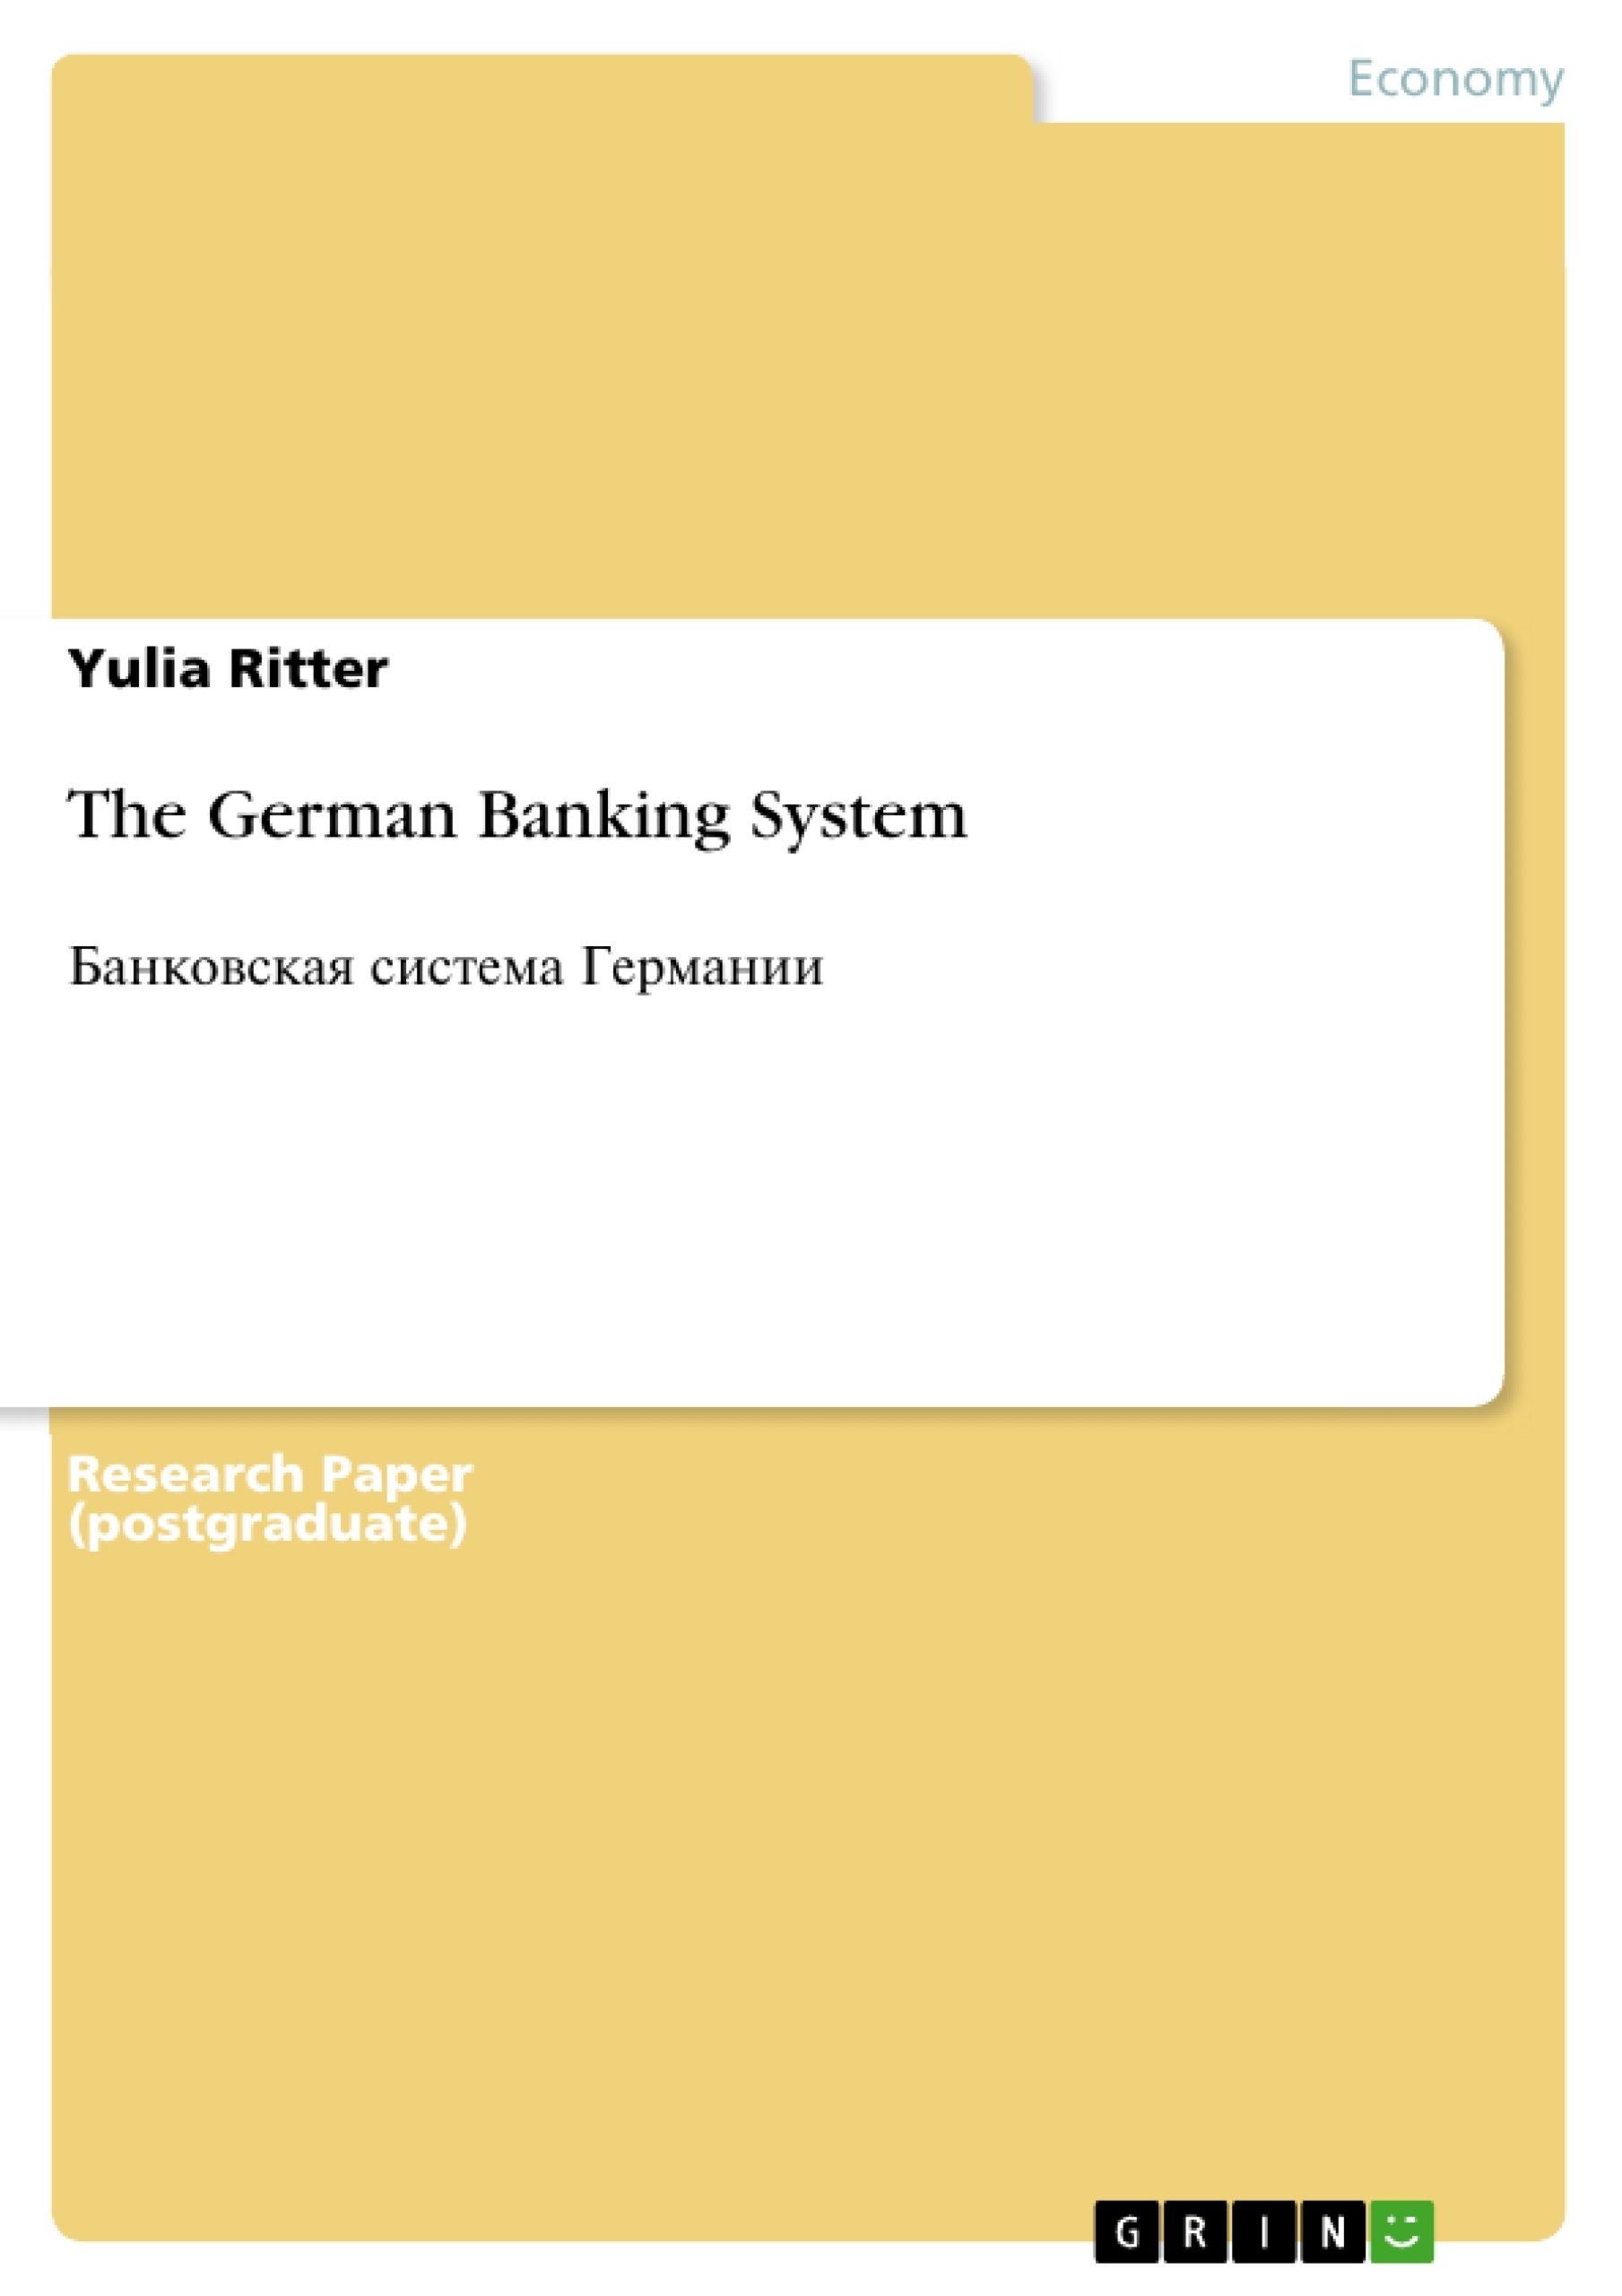 Title: The German Banking System